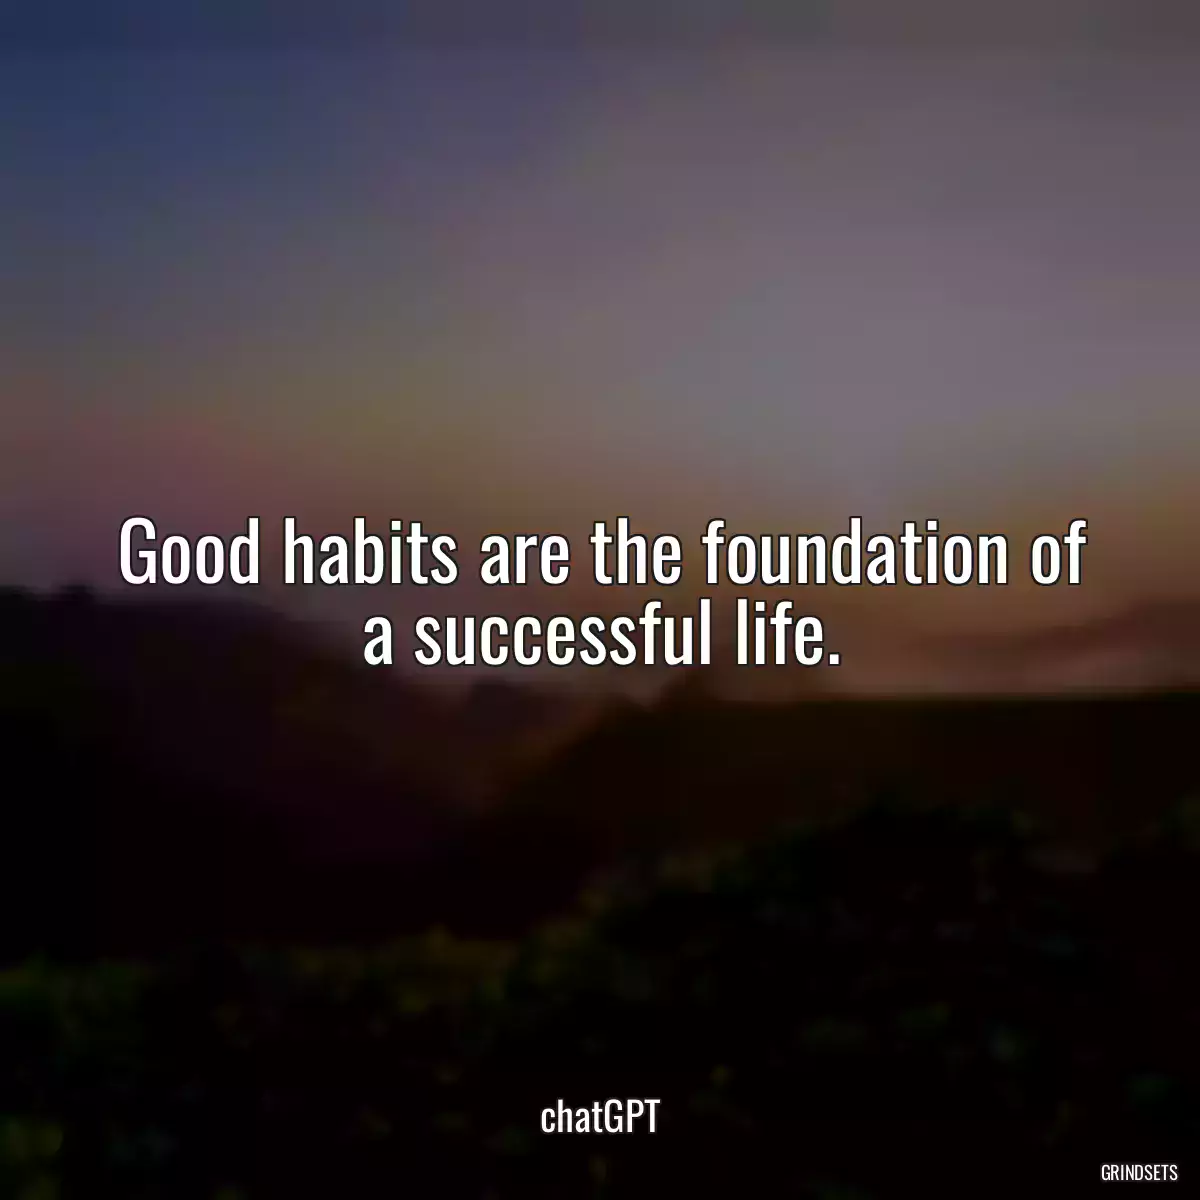 Good habits are the foundation of a successful life.